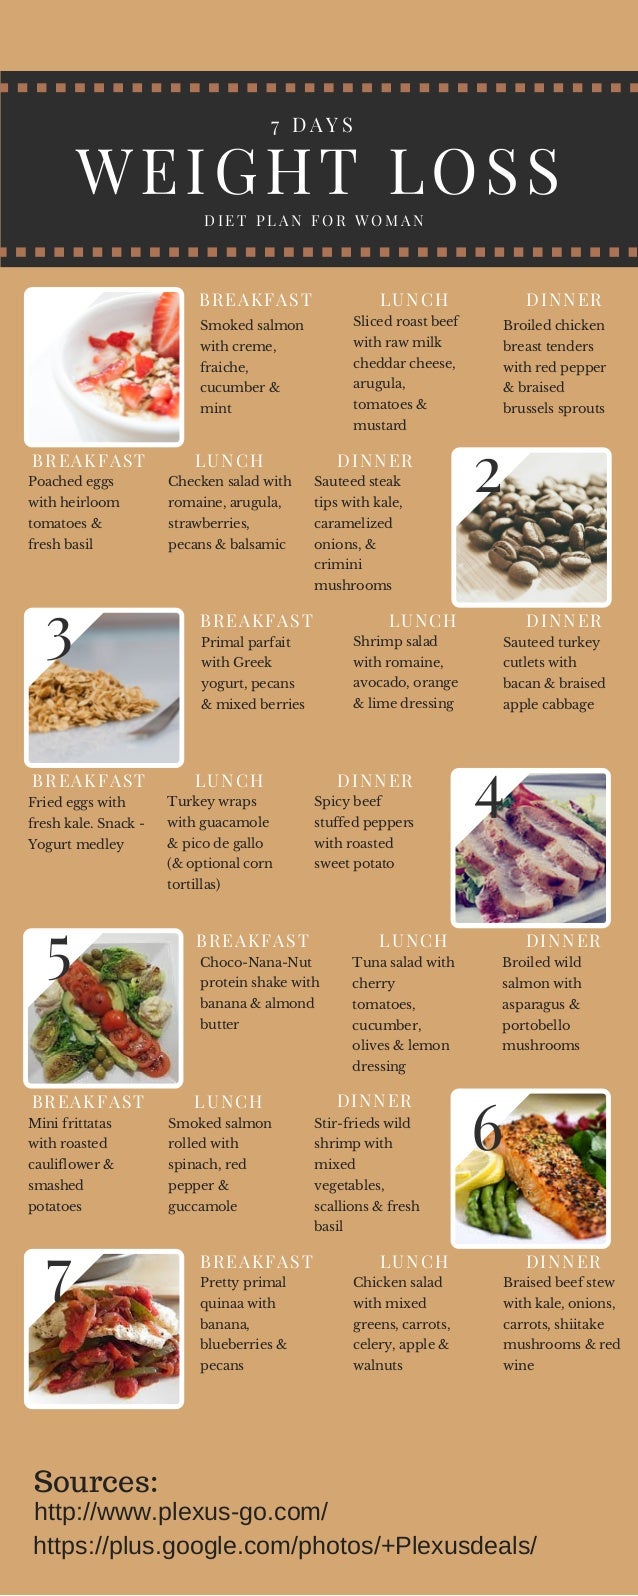 Diet Chart For Female For Weight Loss